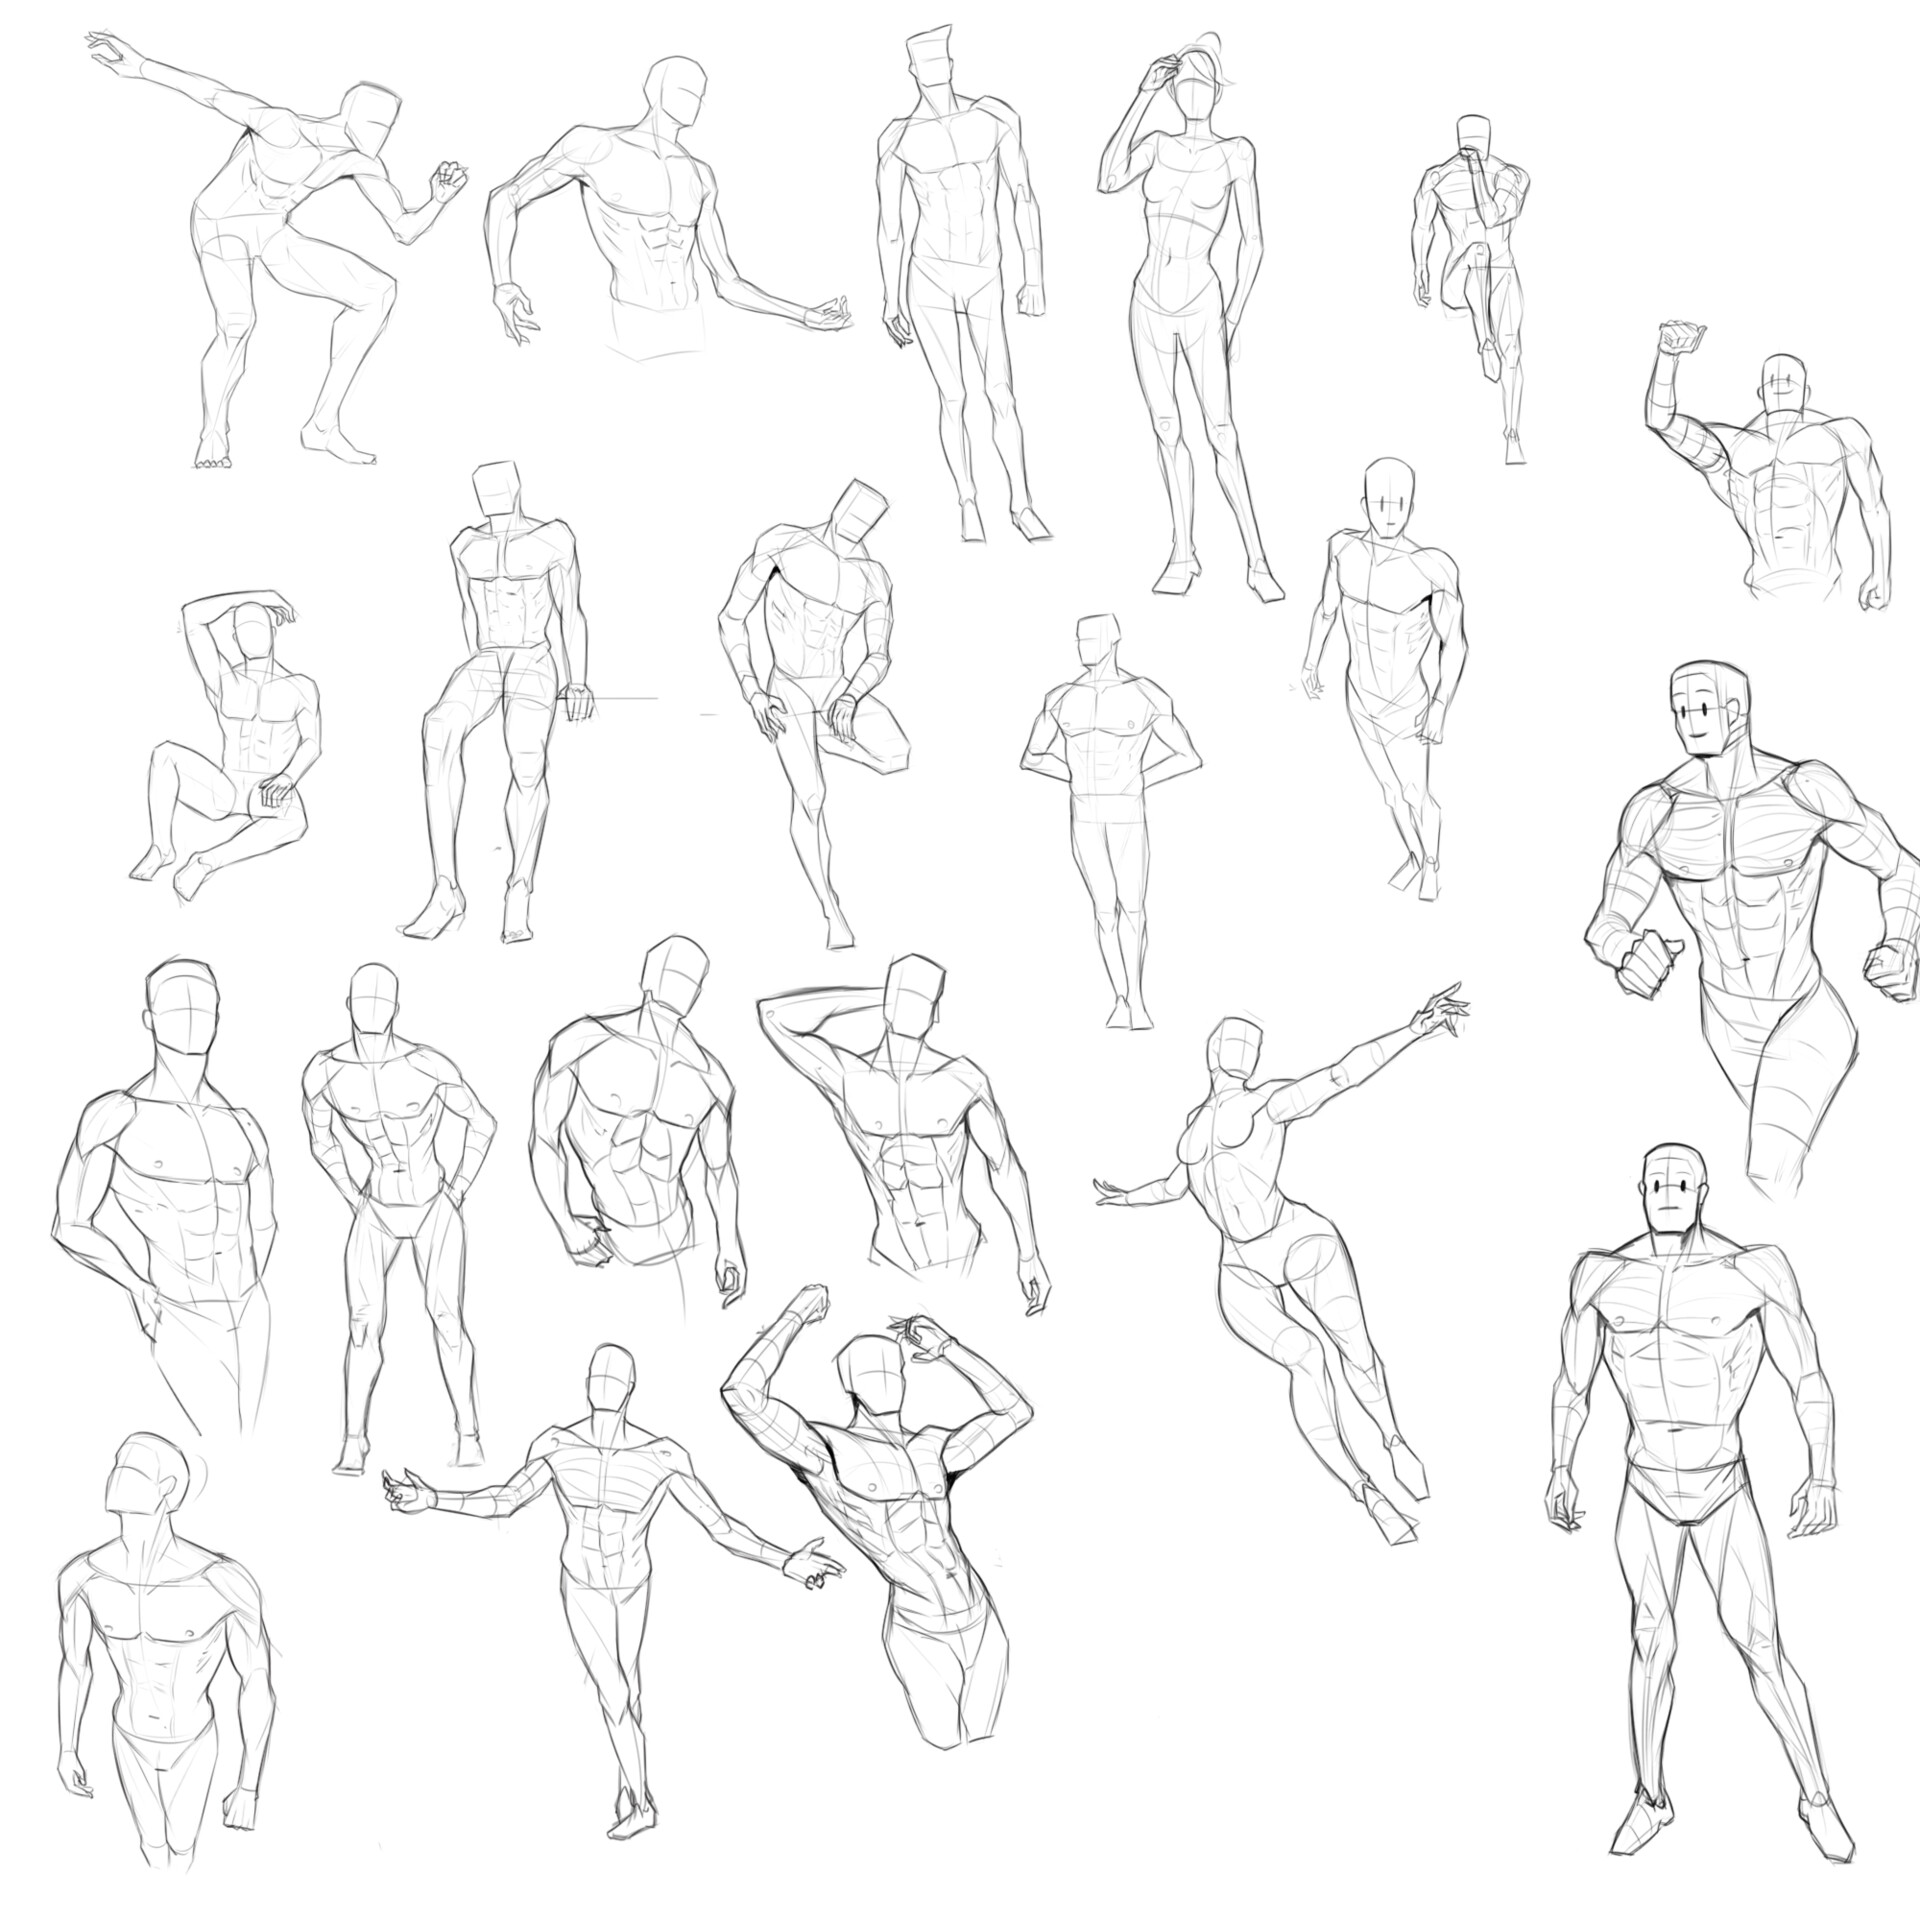 Drew some action poses in photoshop | Male body art, Action poses, Human figure  drawing